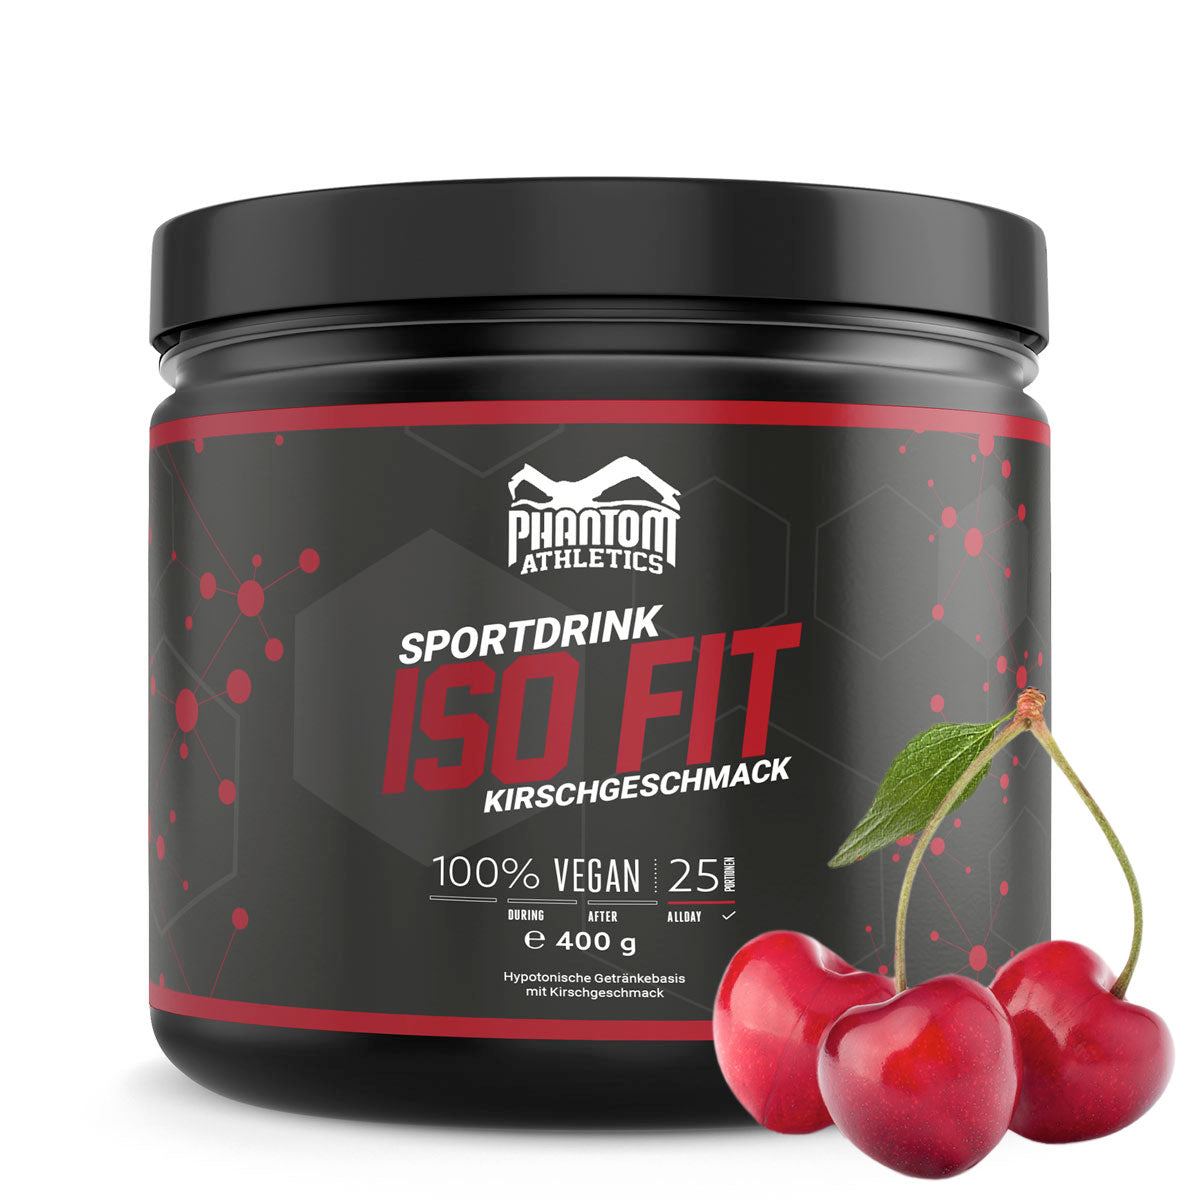 The Phantom ISO FIT nutritional supplement provides you with everything you need for martial arts training. Now with a delicious cherry flavor.